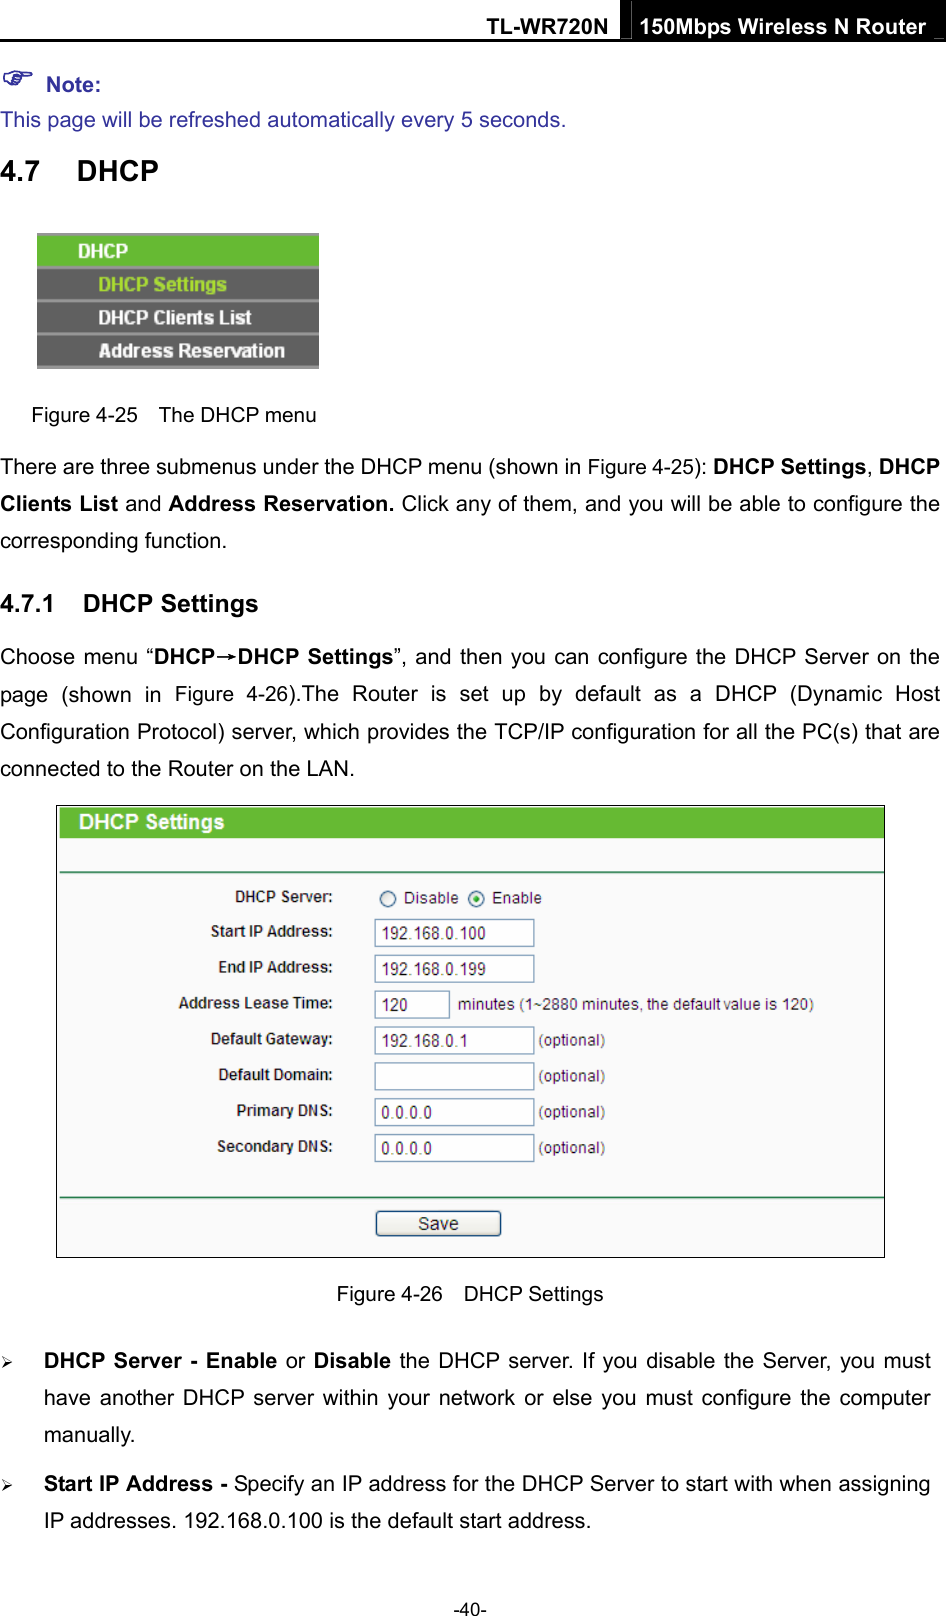 TL-WR720N 150Mbps Wireless N Router ) Note: This page will be refreshed automatically every 5 seconds. 4.7  DHCP  Figure 4-25    The DHCP menu There are three submenus under the DHCP menu (shown in Figure 4-25): DHCP Settings, DHCP Clients List and Address Reservation. Click any of them, and you will be able to configure the corresponding function. 4.7.1  DHCP Settings Choose menu “DHCP→DHCP Settings”, and then you can configure the DHCP Server on the page (shown in Figure 4-26).The Router is set up by default as a DHCP (Dynamic Host Configuration Protocol) server, which provides the TCP/IP configuration for all the PC(s) that are connected to the Router on the LAN.    Figure 4-26  DHCP Settings ¾ DHCP Server - Enable or Disable the DHCP server. If you disable the Server, you must have another DHCP server within your network or else you must configure the computer manually. ¾ Start IP Address - Specify an IP address for the DHCP Server to start with when assigning IP addresses. 192.168.0.100 is the default start address. -40- 